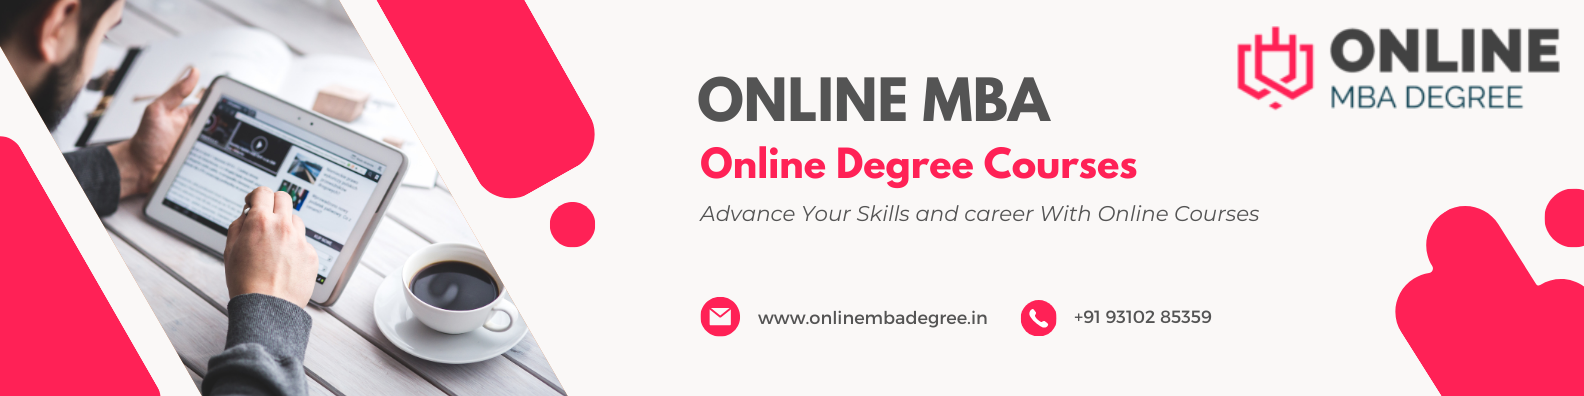 Online MBA Cover Image